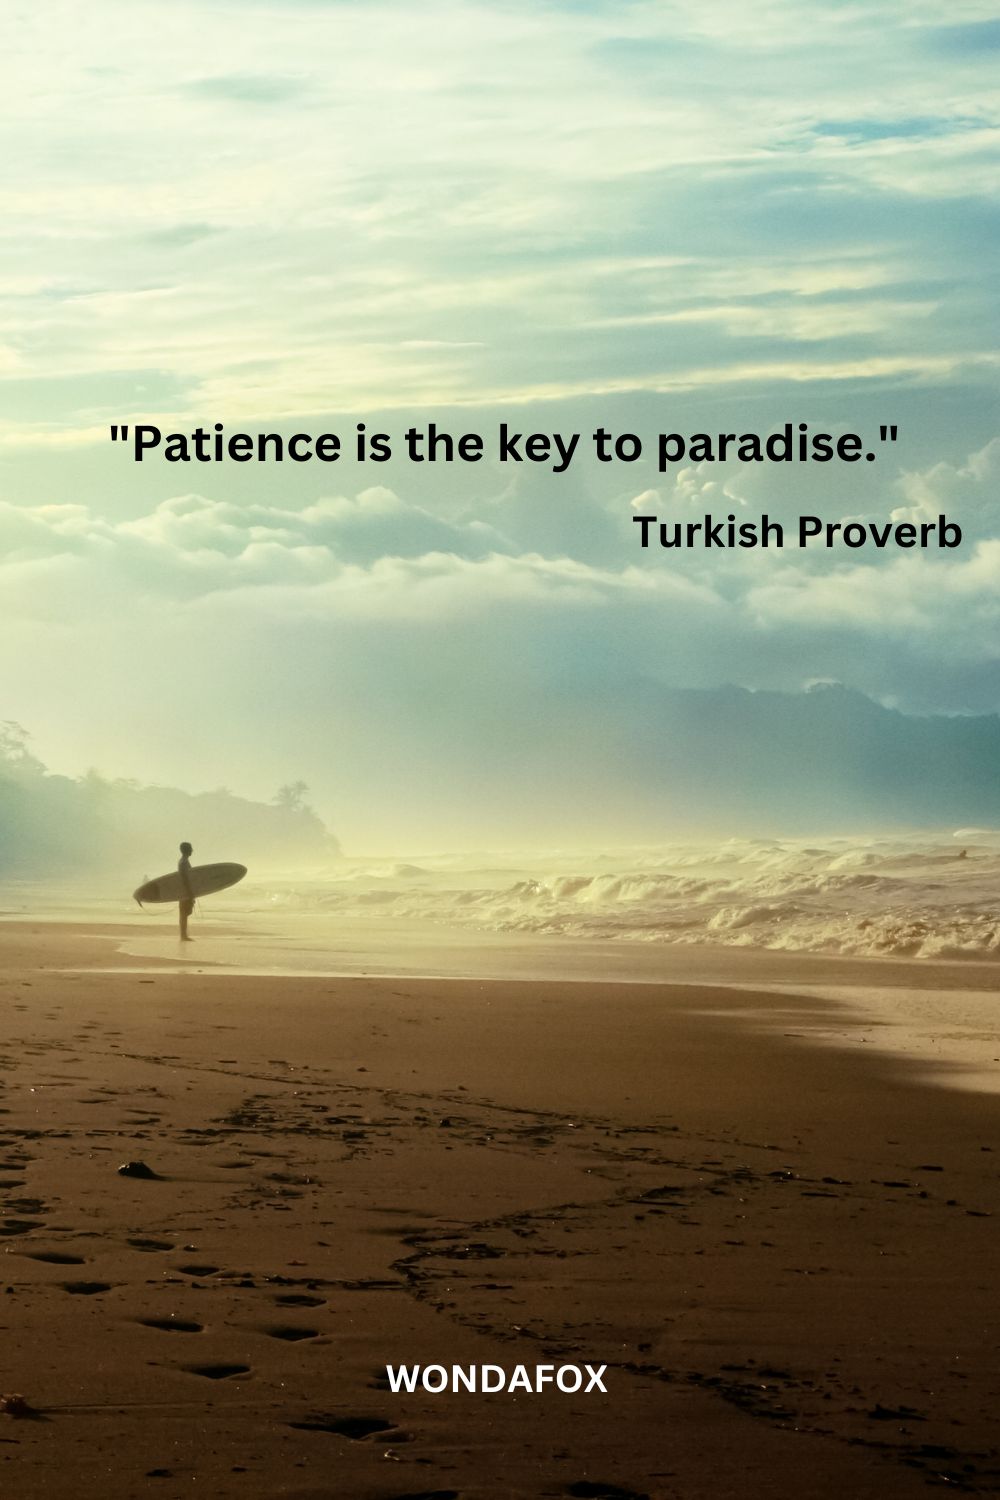 "Patience is the key to paradise."
Turkish Proverb